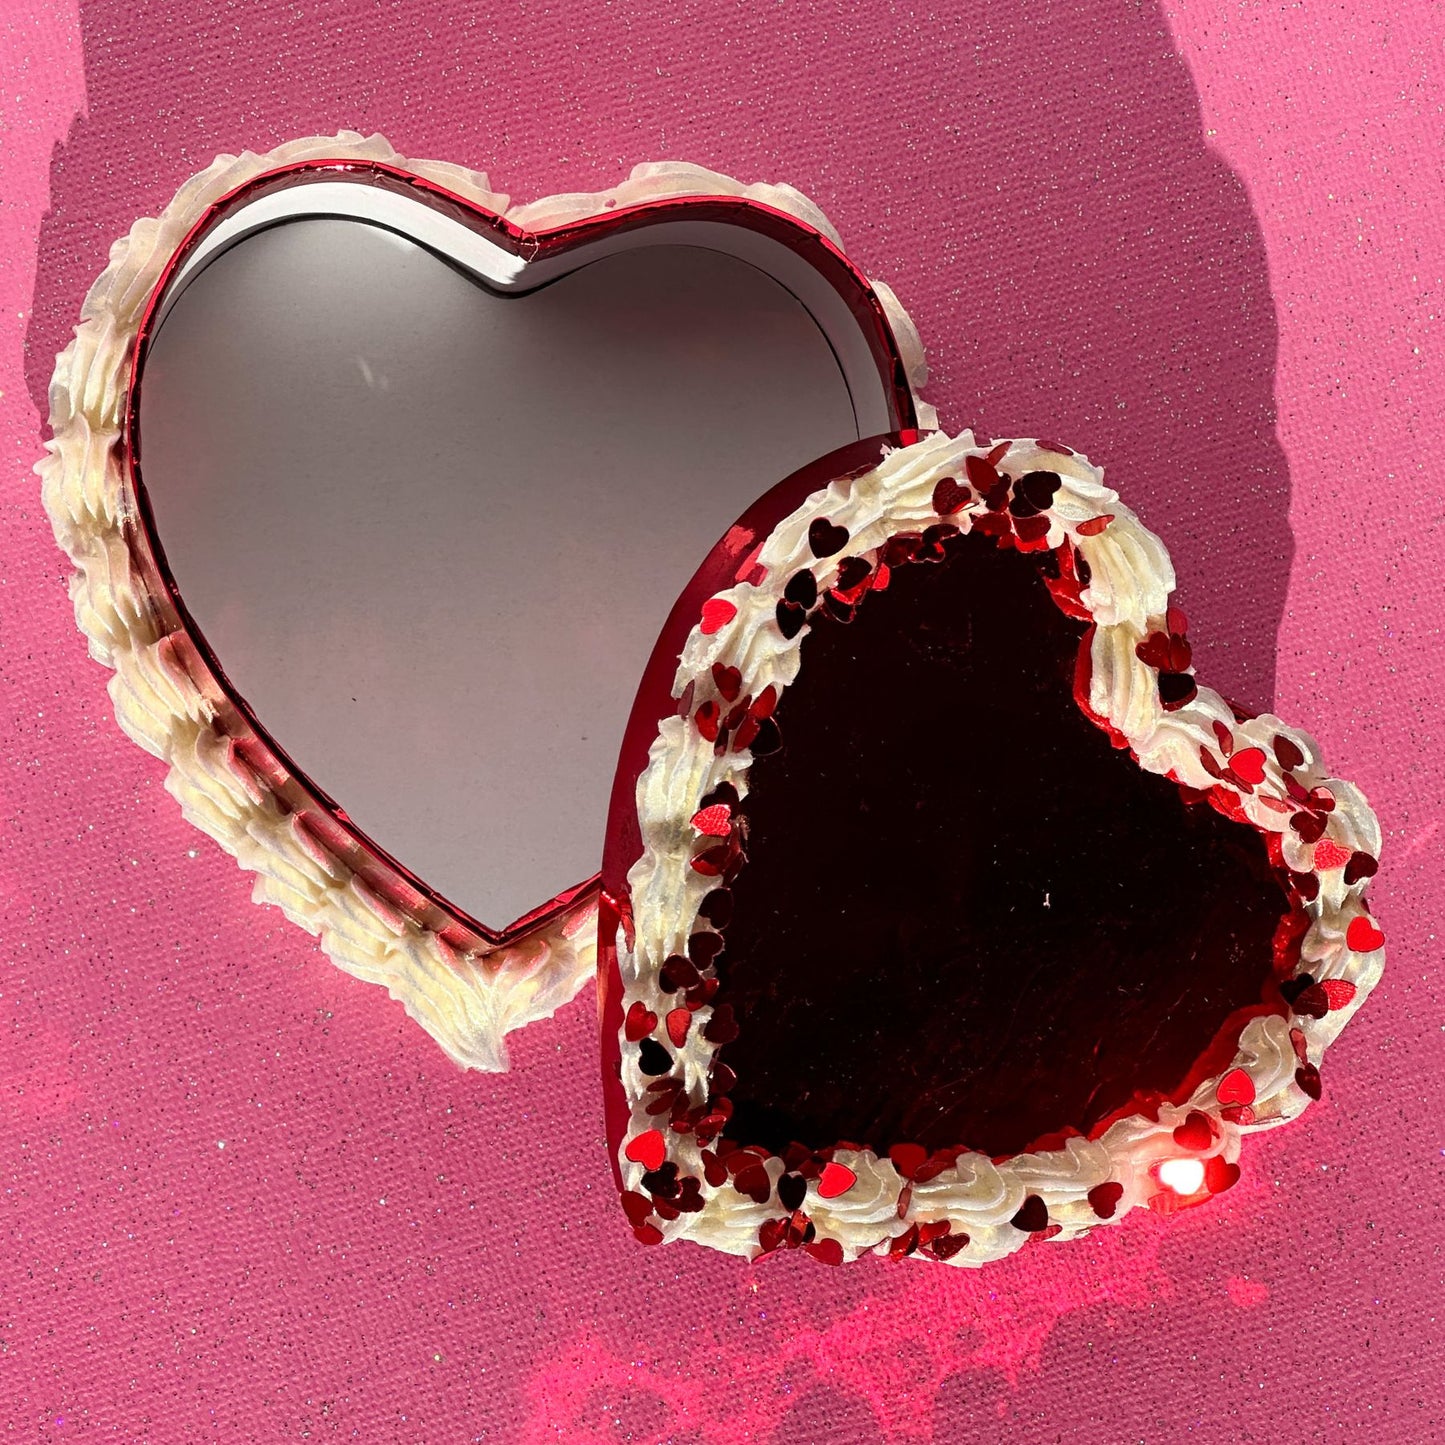 3D Painted Cake - Heart Box Red Metallic With Pearl "Frosting" and Red Heart Glitter